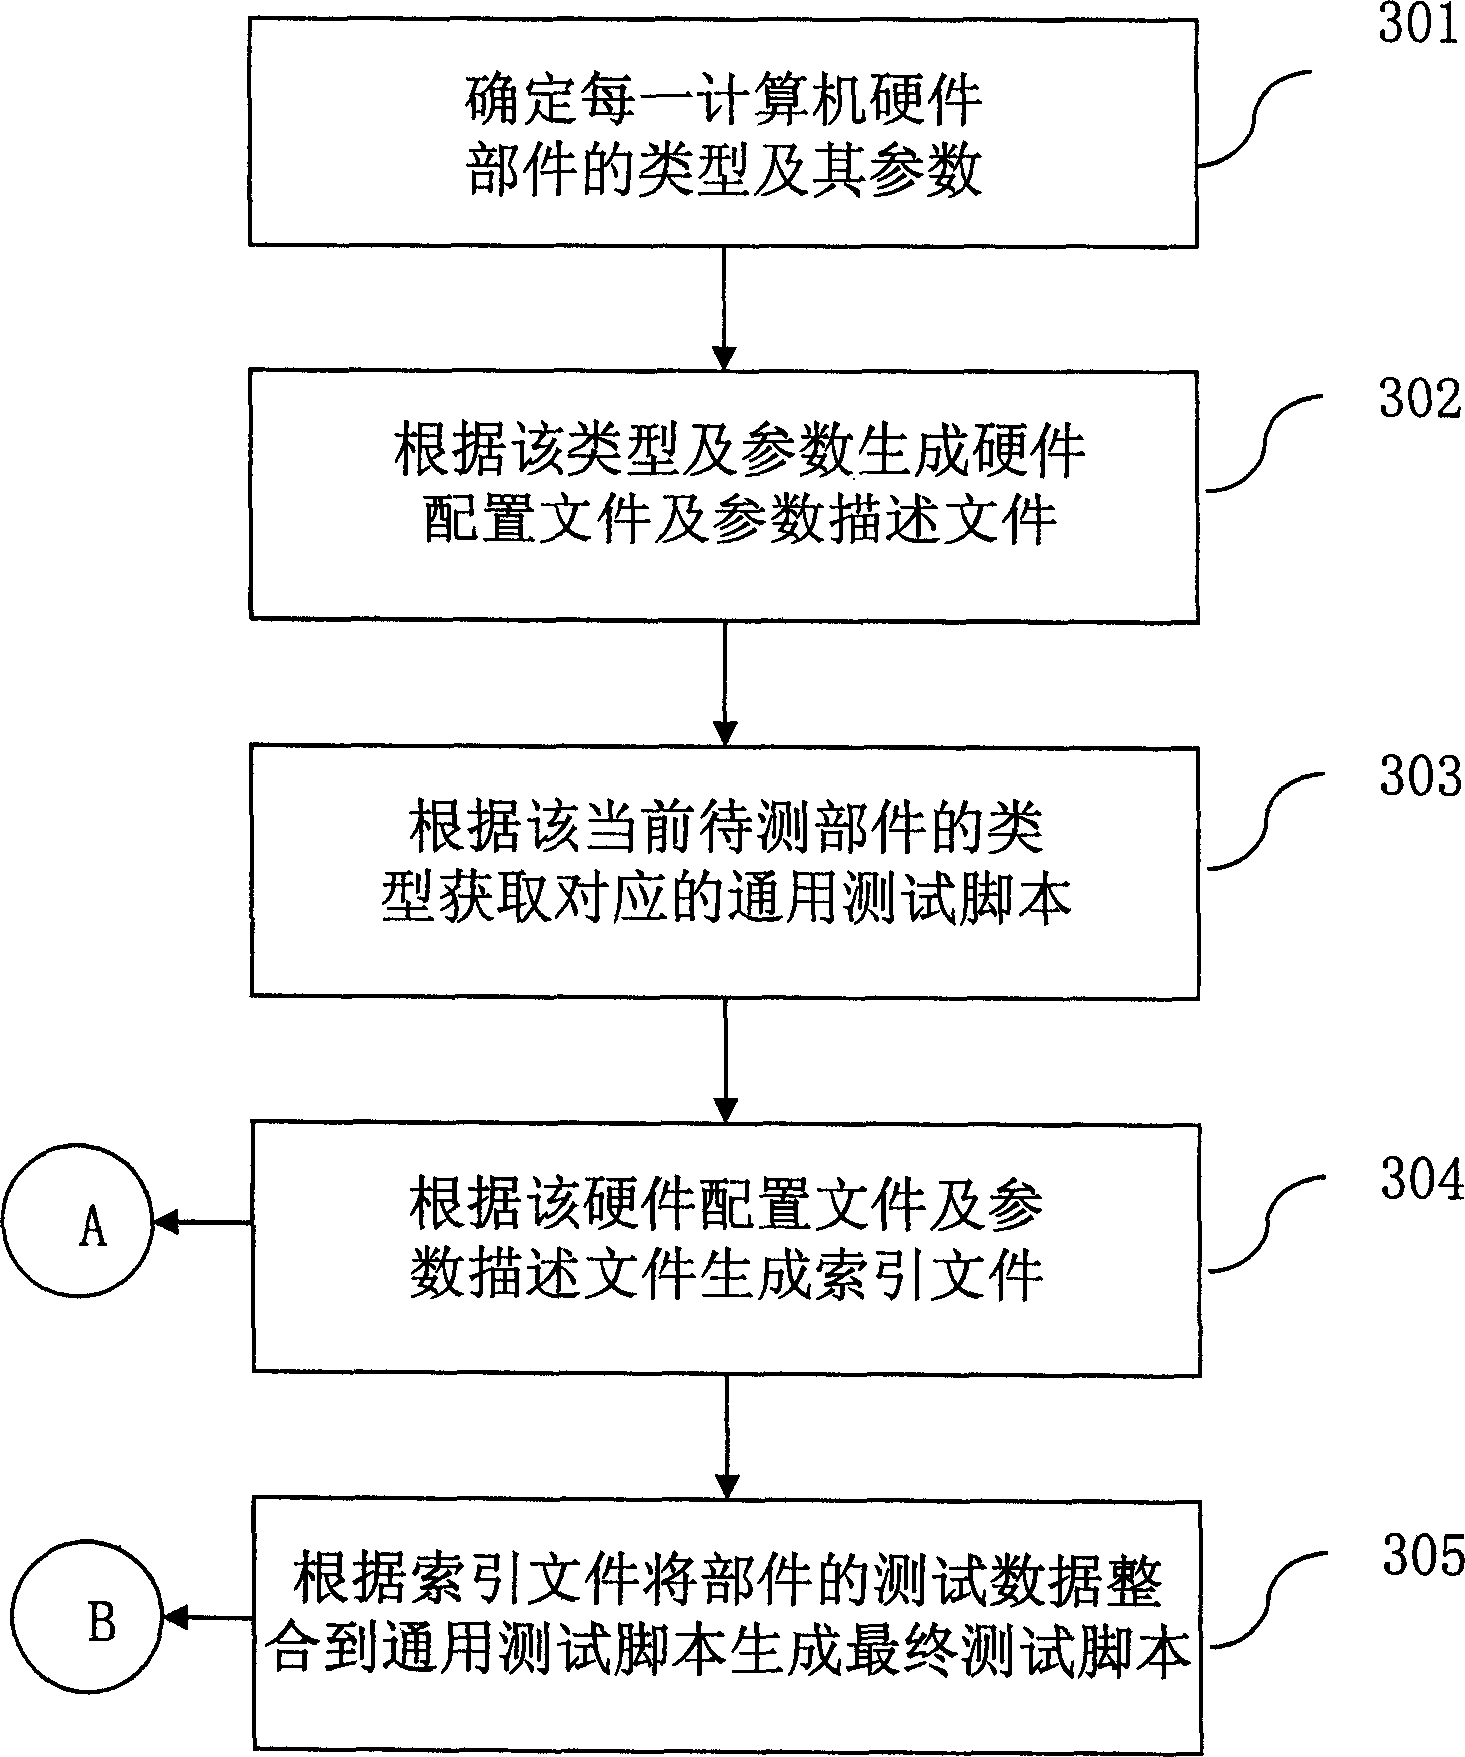 Hardware-level based test script automatic generating system and method